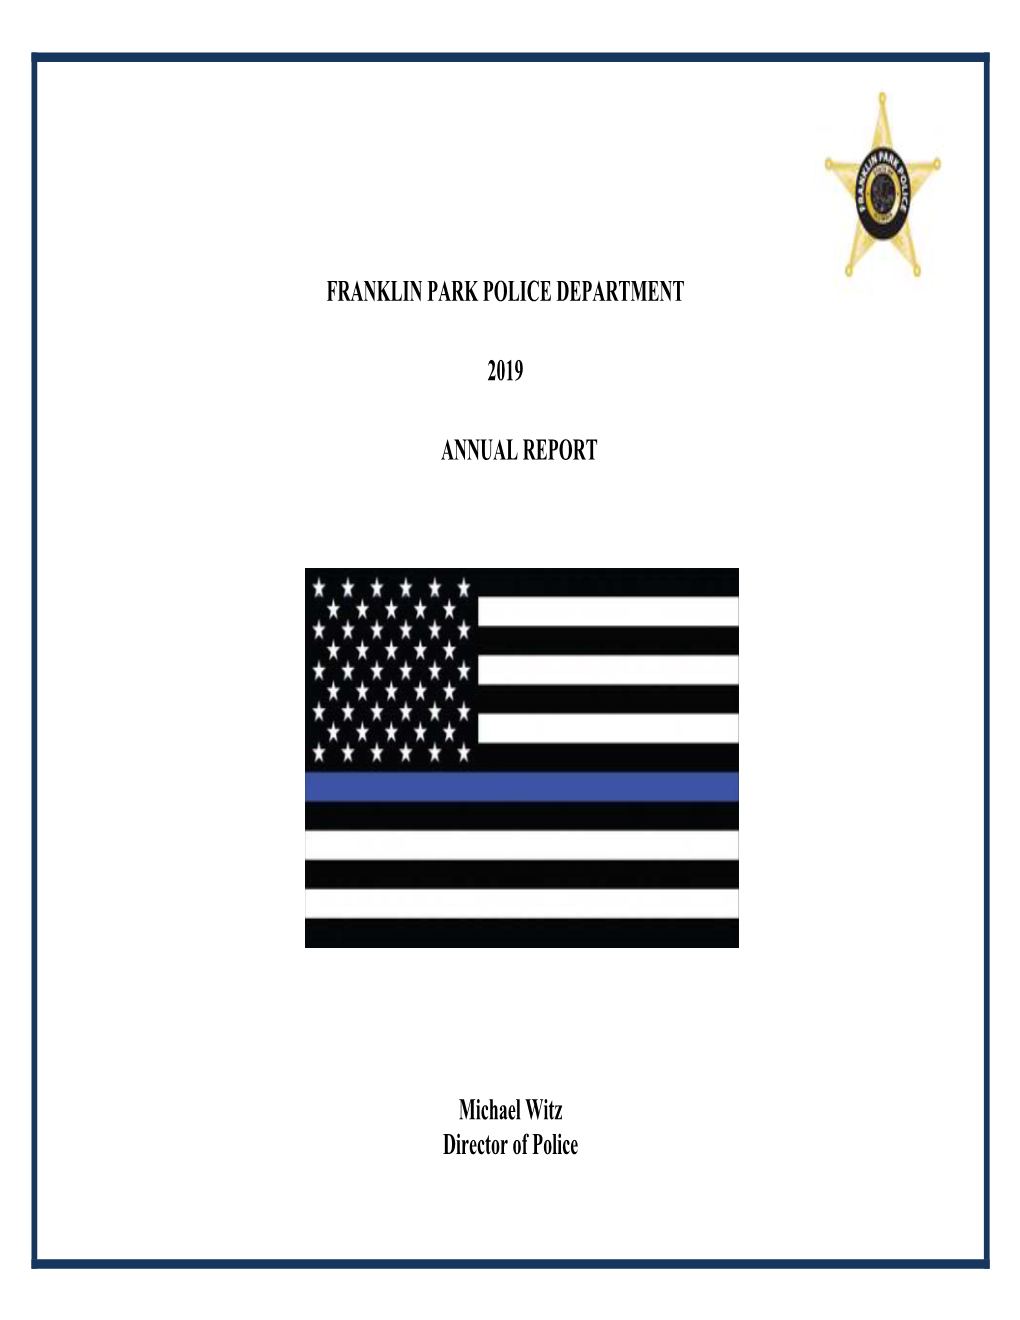 Franklin Park Police Department 2019 Annual